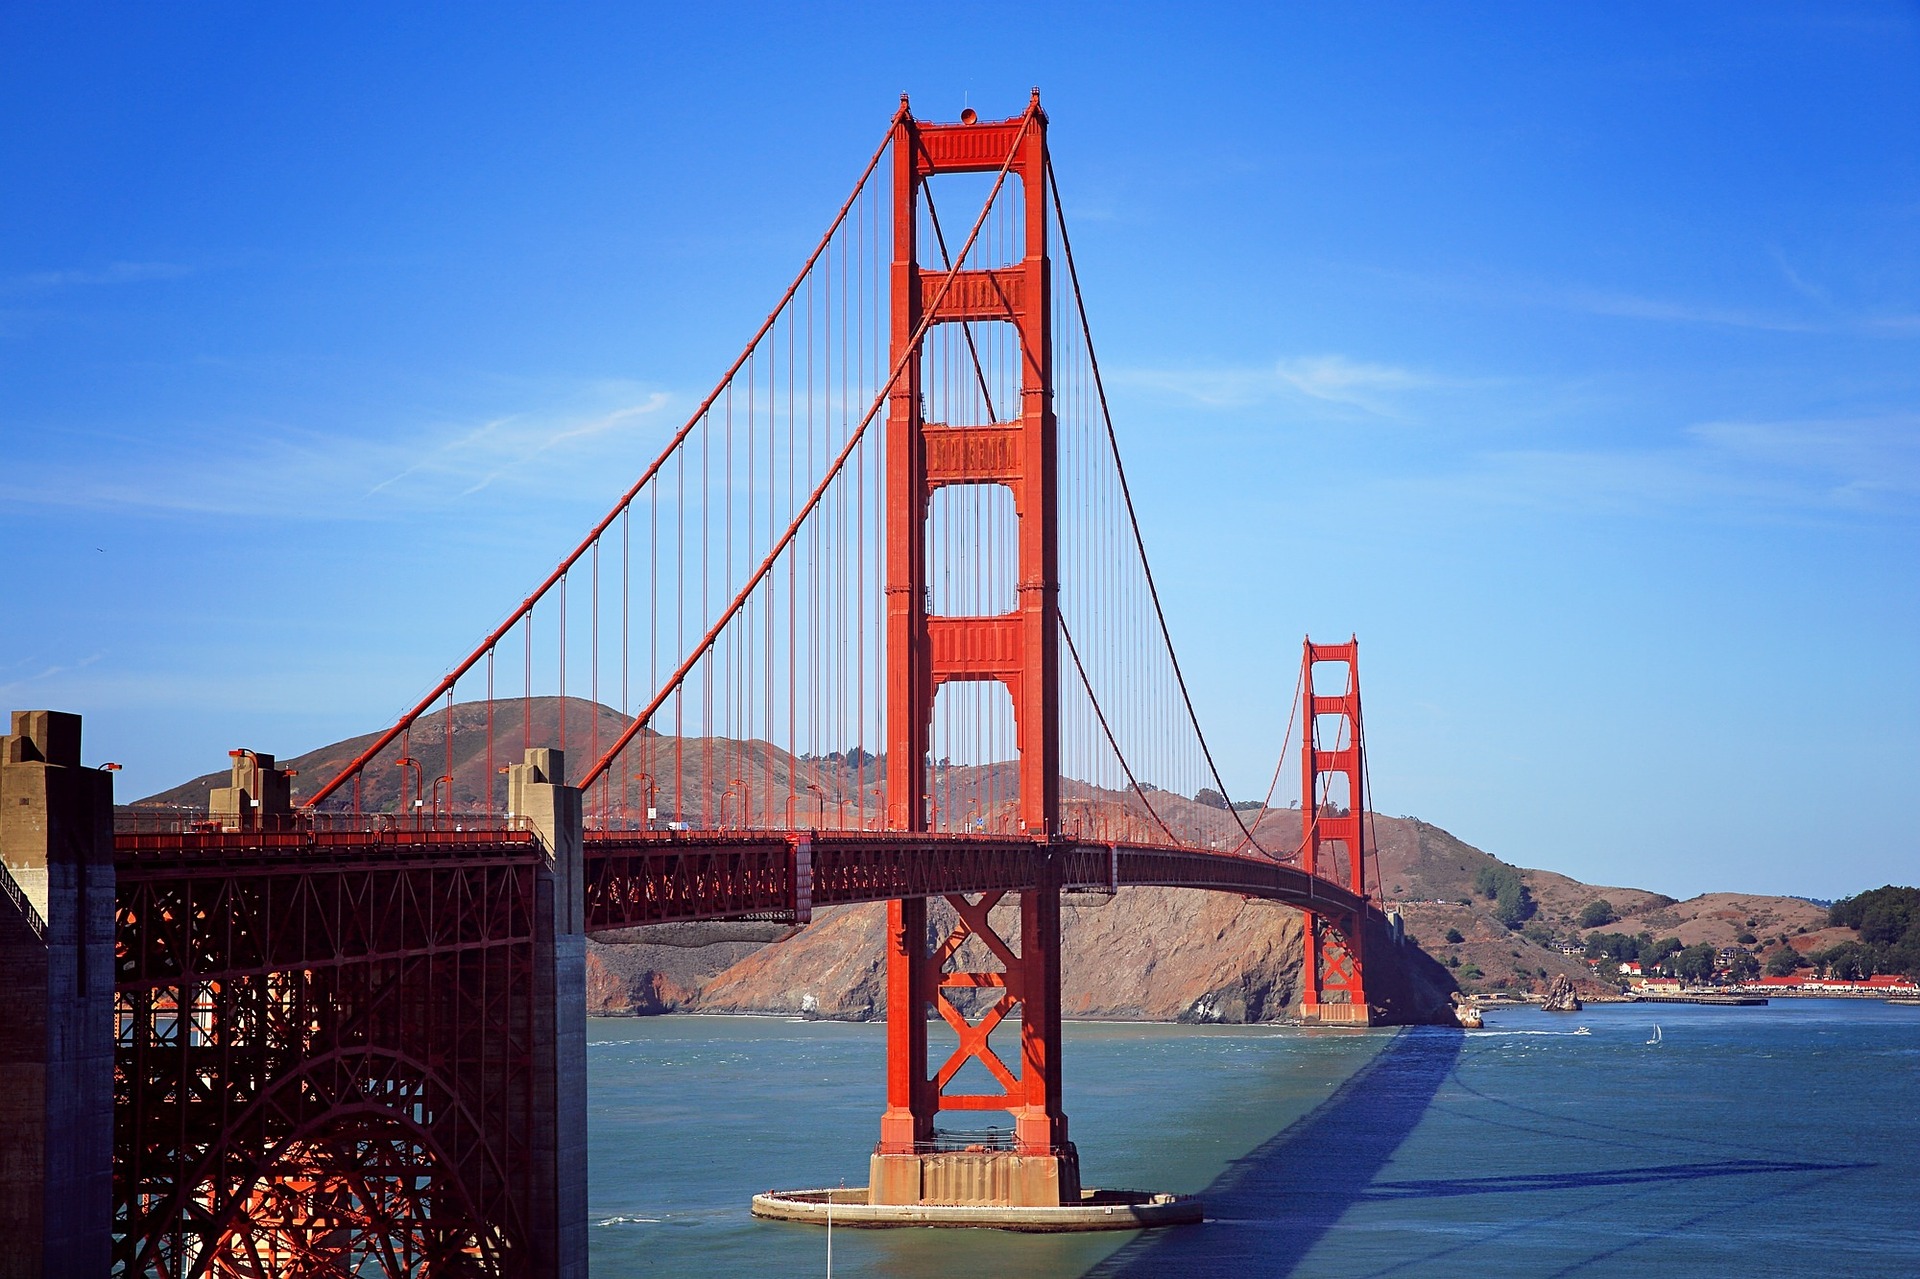 A view of the Golden Gate Bridge with blue sky in the background